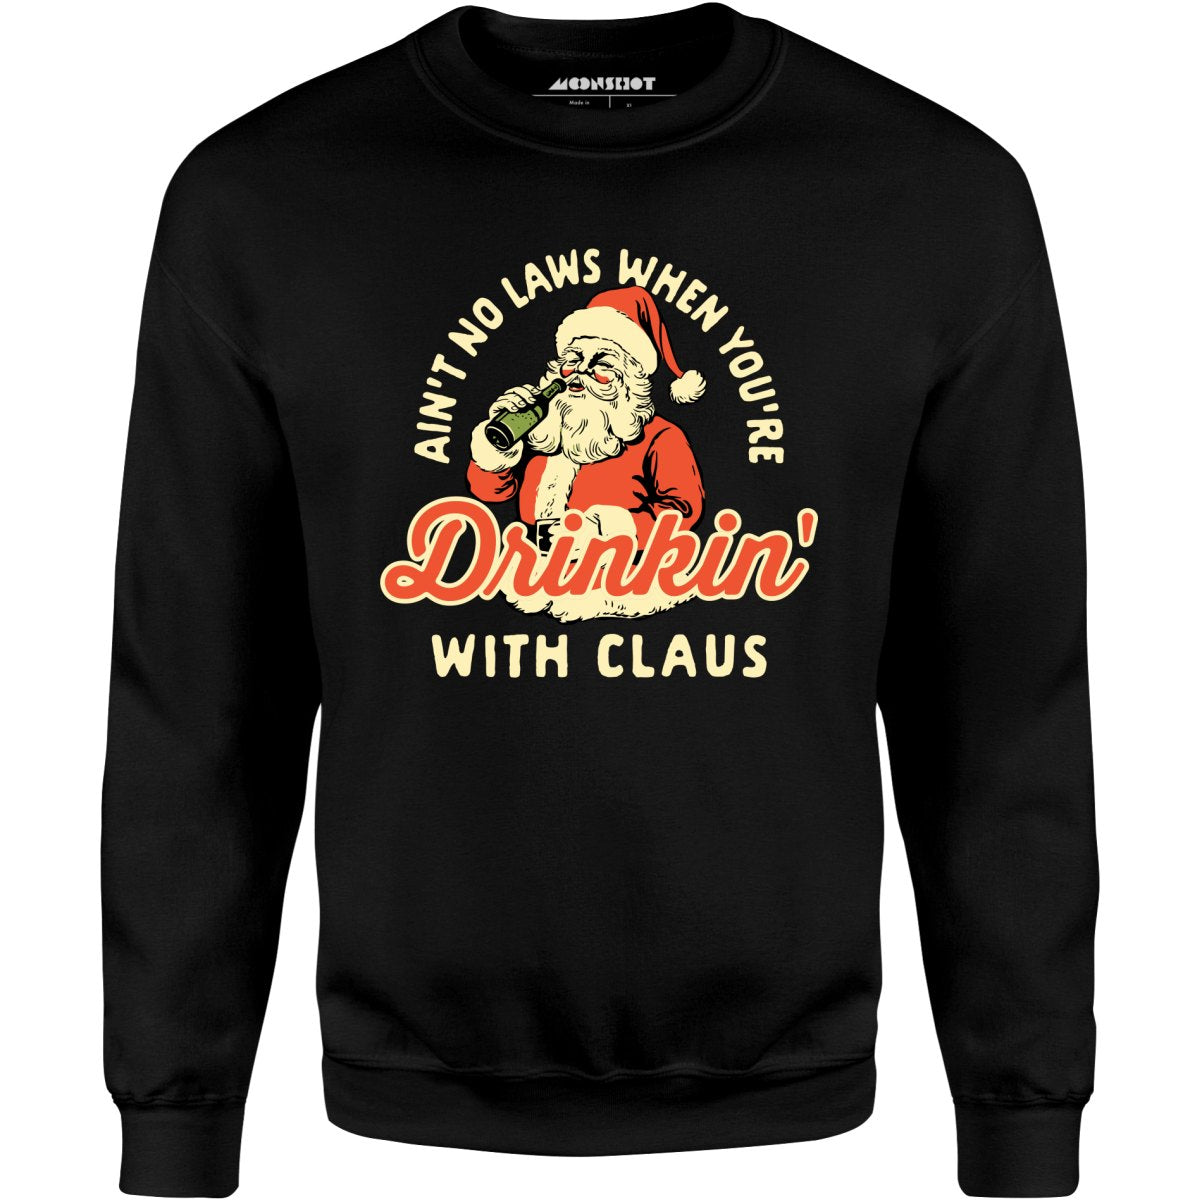 Ain't No Laws When You're Drinkin' With Claus - Unisex Sweatshirt